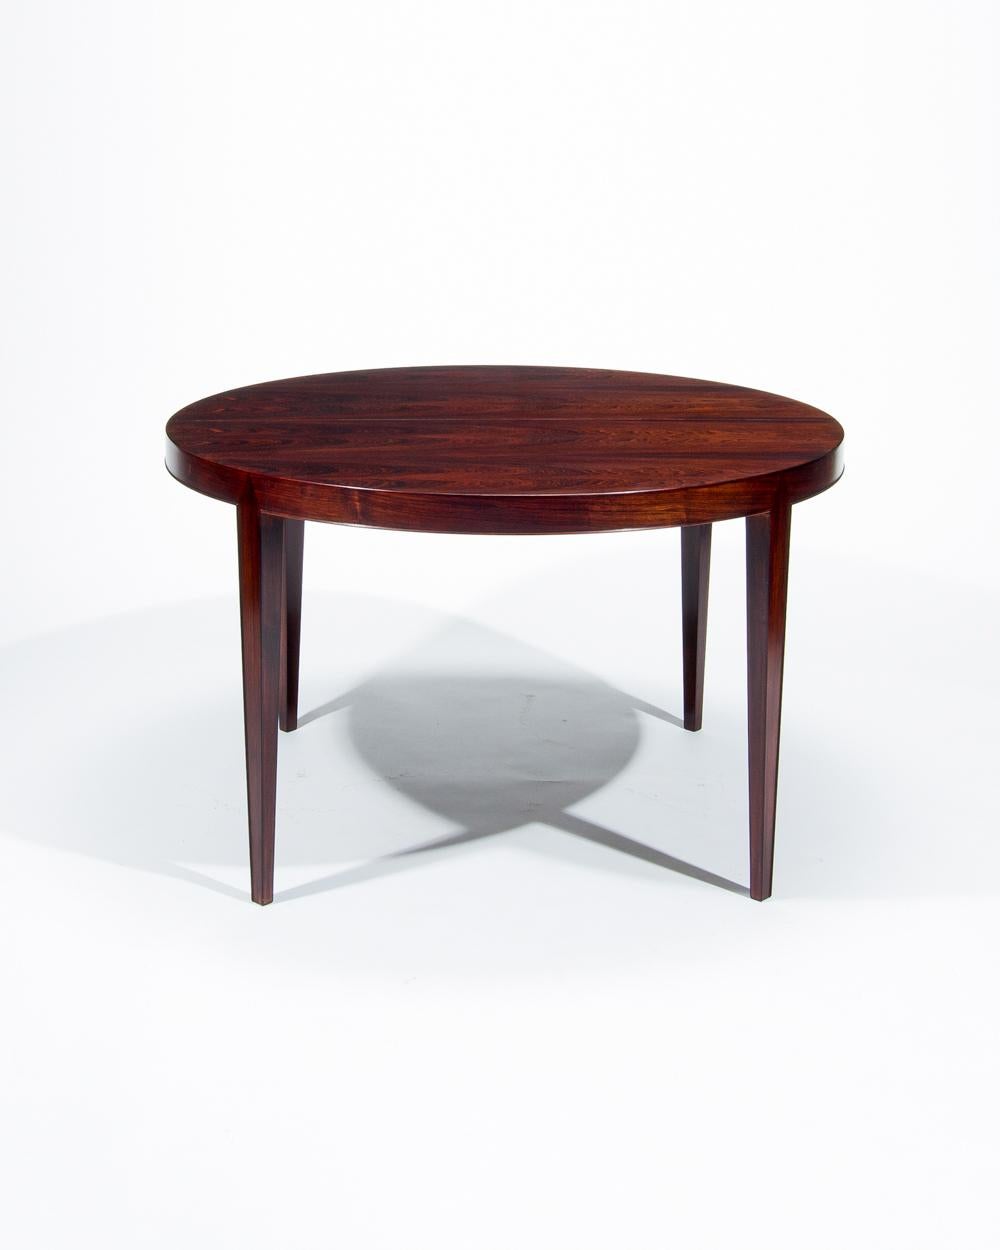 Danish Rosewood Dining Table by Severin Hansen, Midcentury Design, 1960s For Sale 3